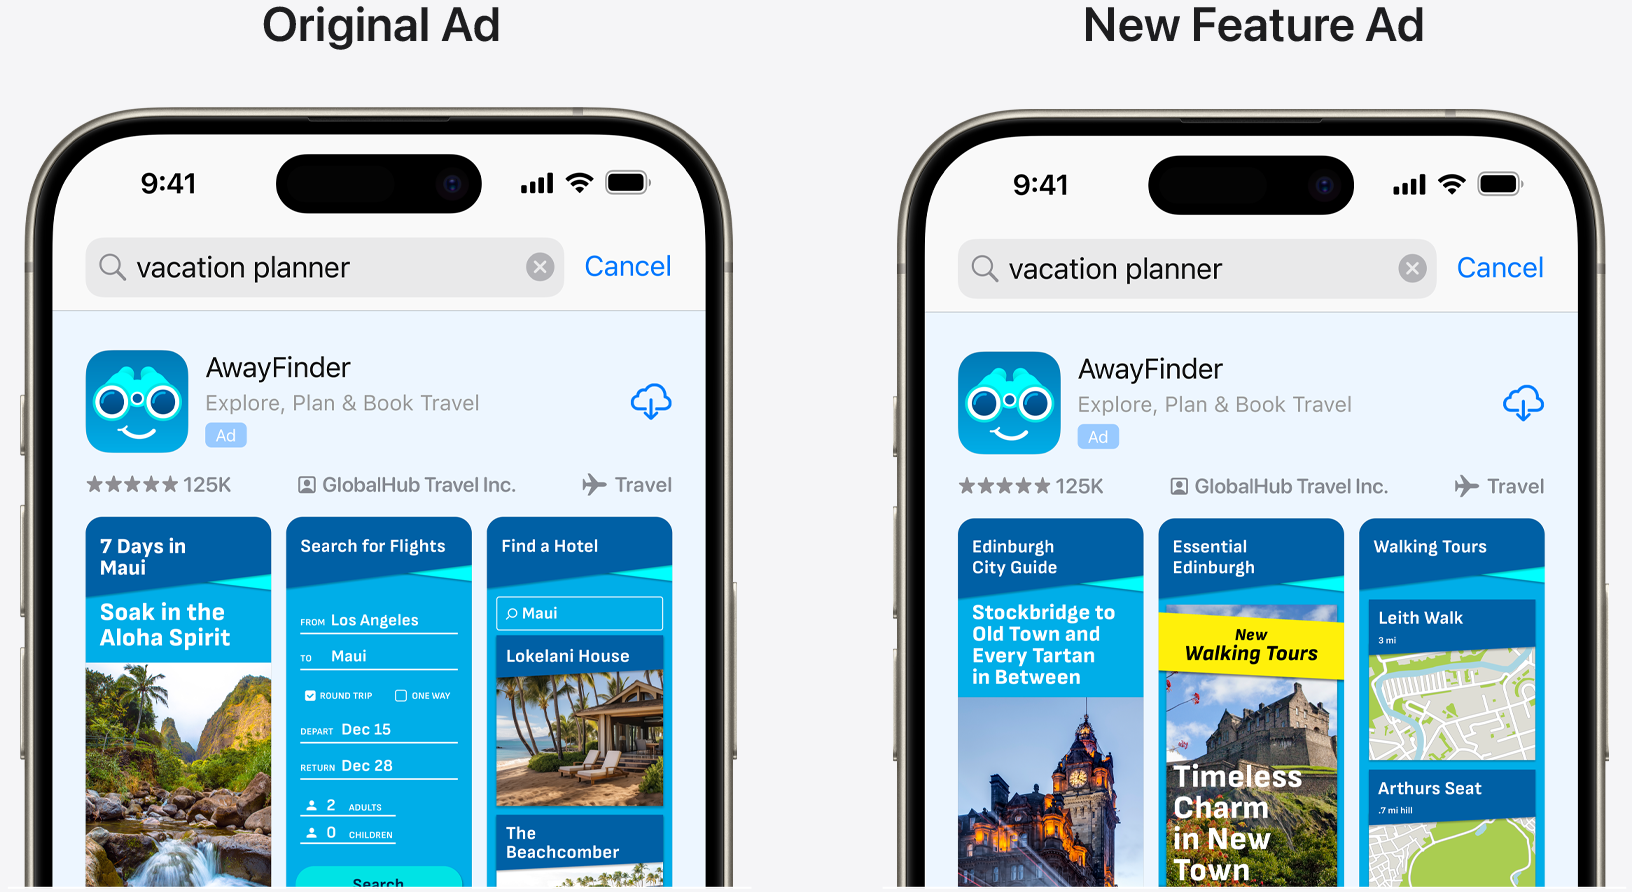 Side by side comparison of original ad for example app AwayFinder and an ad highlighting a new feature.